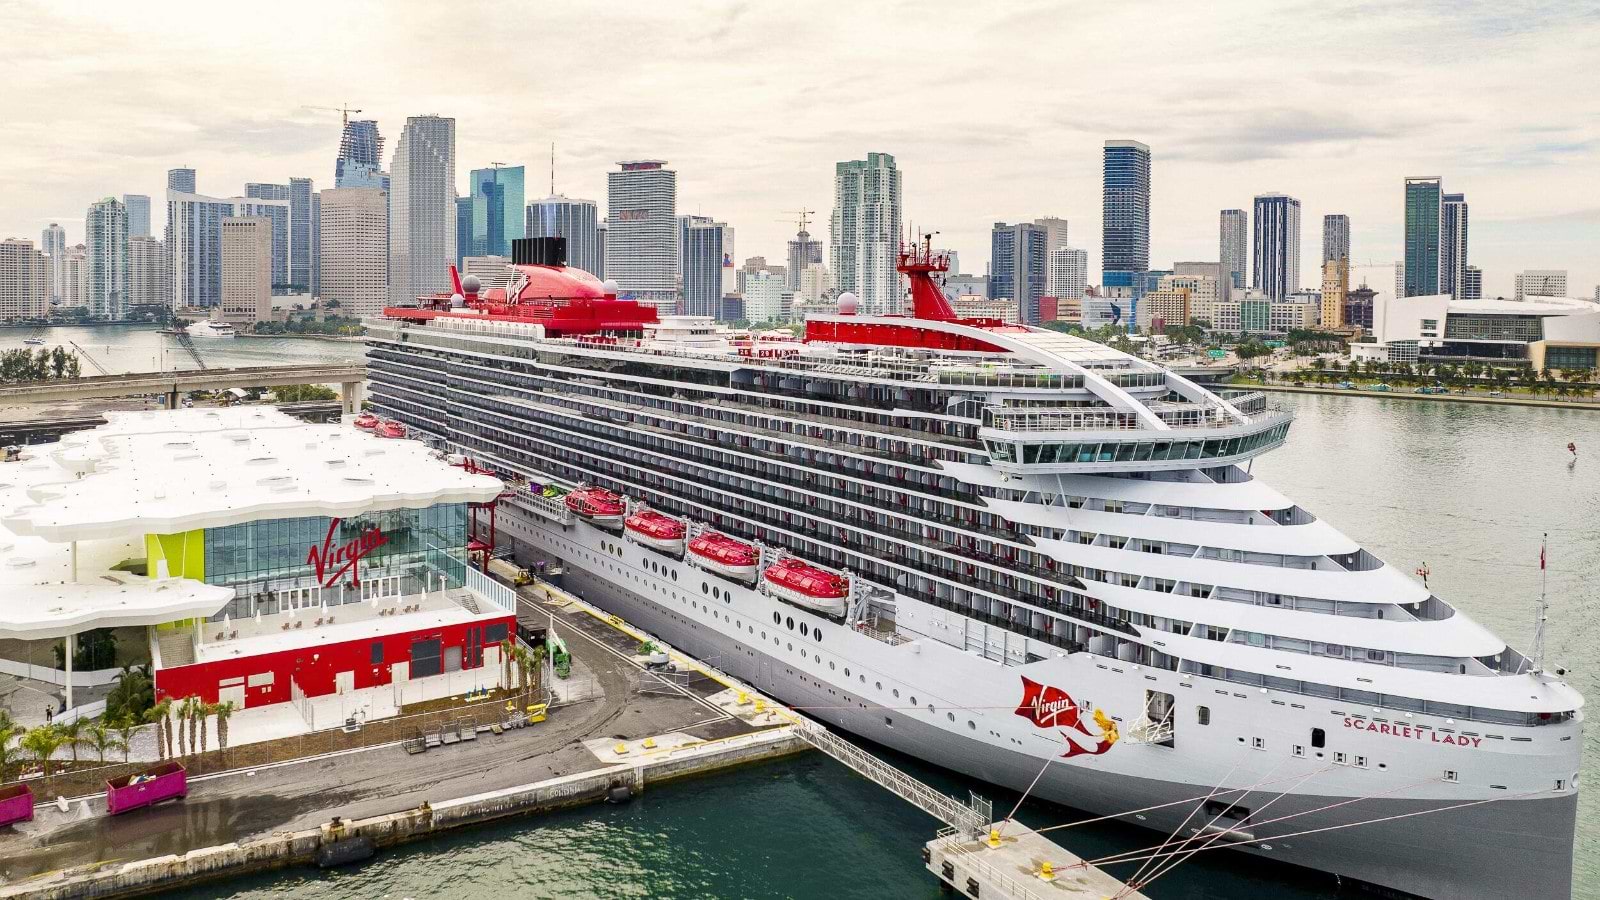 Image of Scarlet Lady at Terminal V-5, sourced from: Virgin Voyages https://touristwire.com/wp-content/uploads/2023/06/Scarlet-Lady-at-Terminal-V-5.JPG.jpg